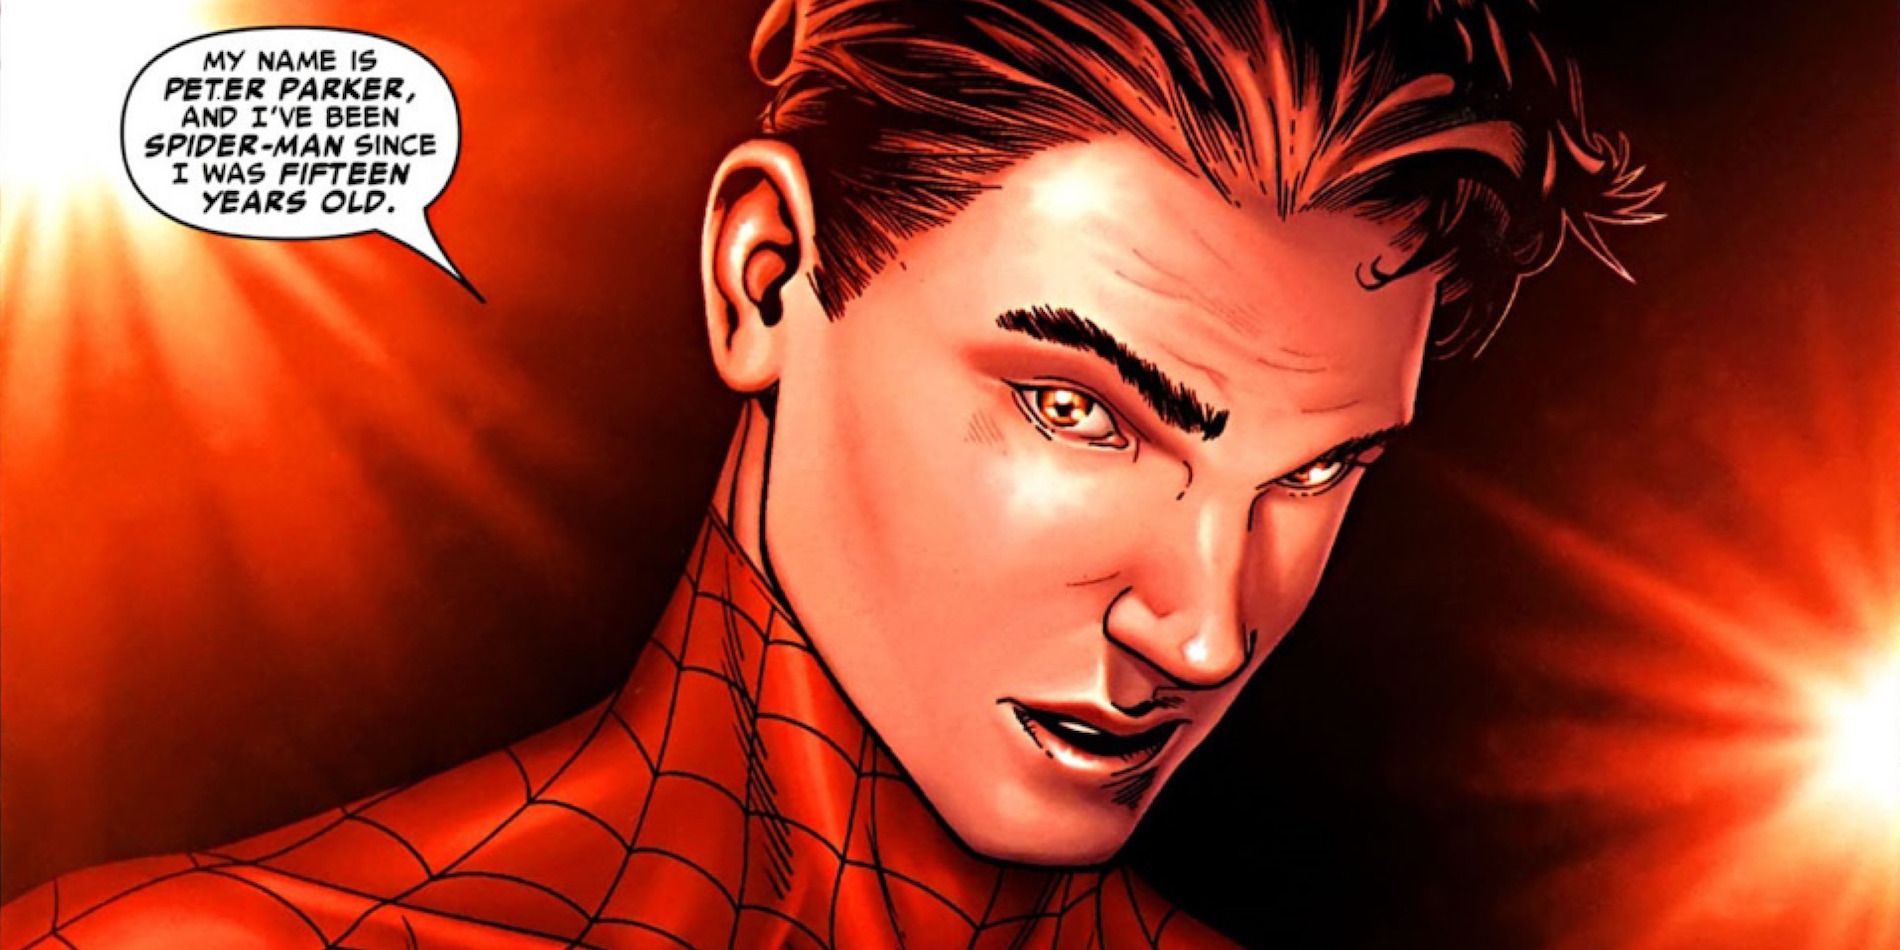 Spider-Man without his mask confessing his identity in Marvel Comics